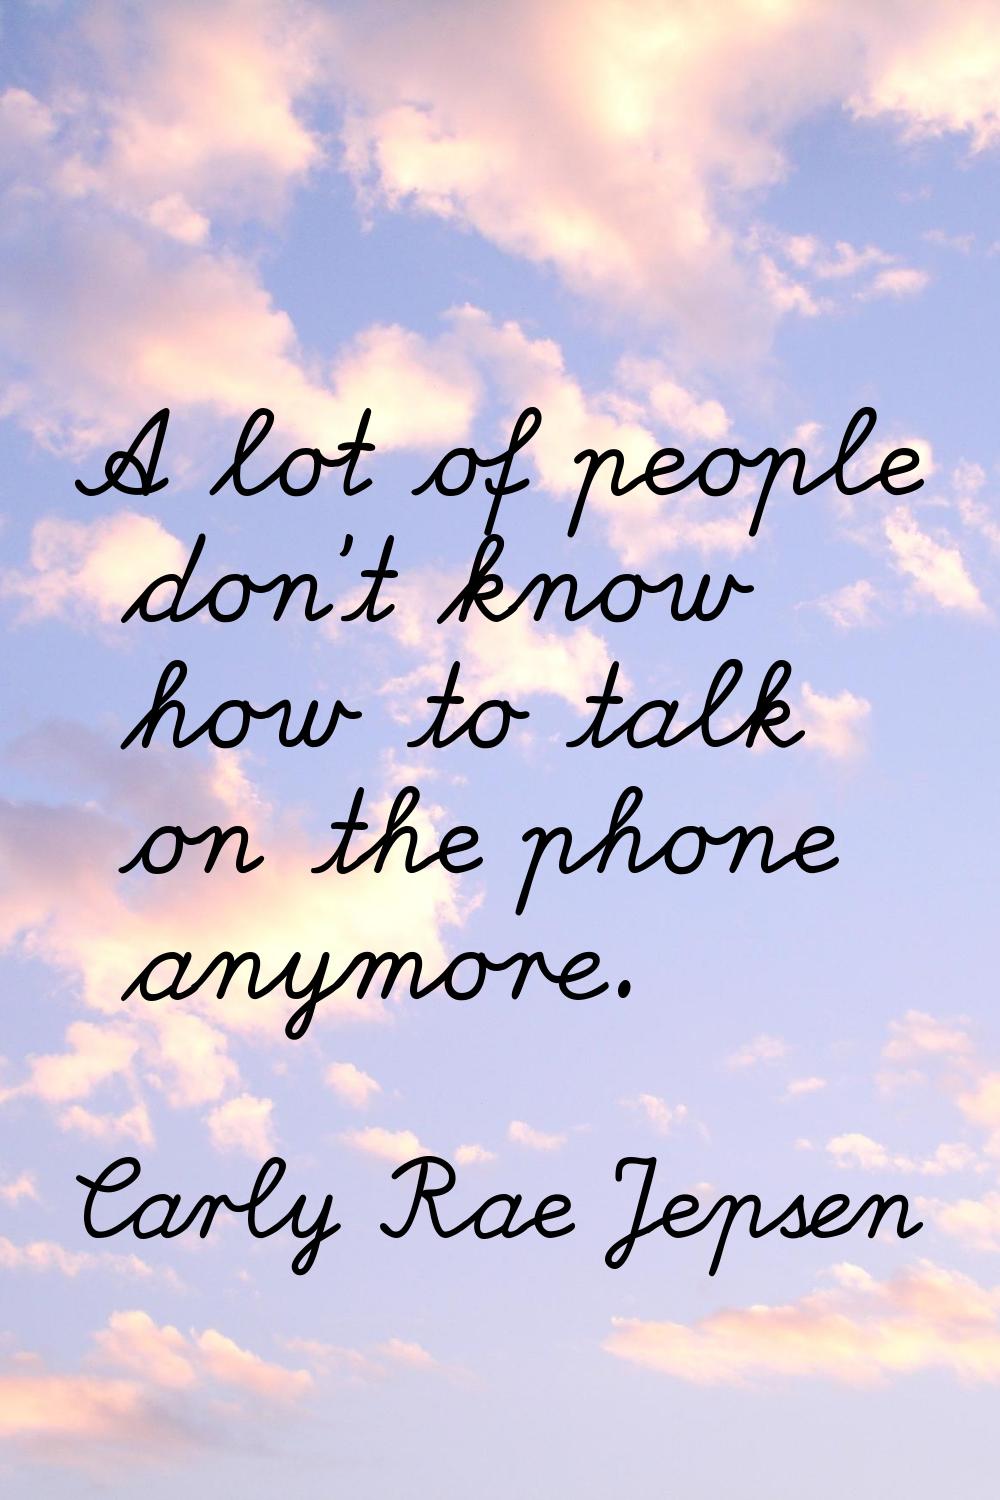 A lot of people don't know how to talk on the phone anymore.